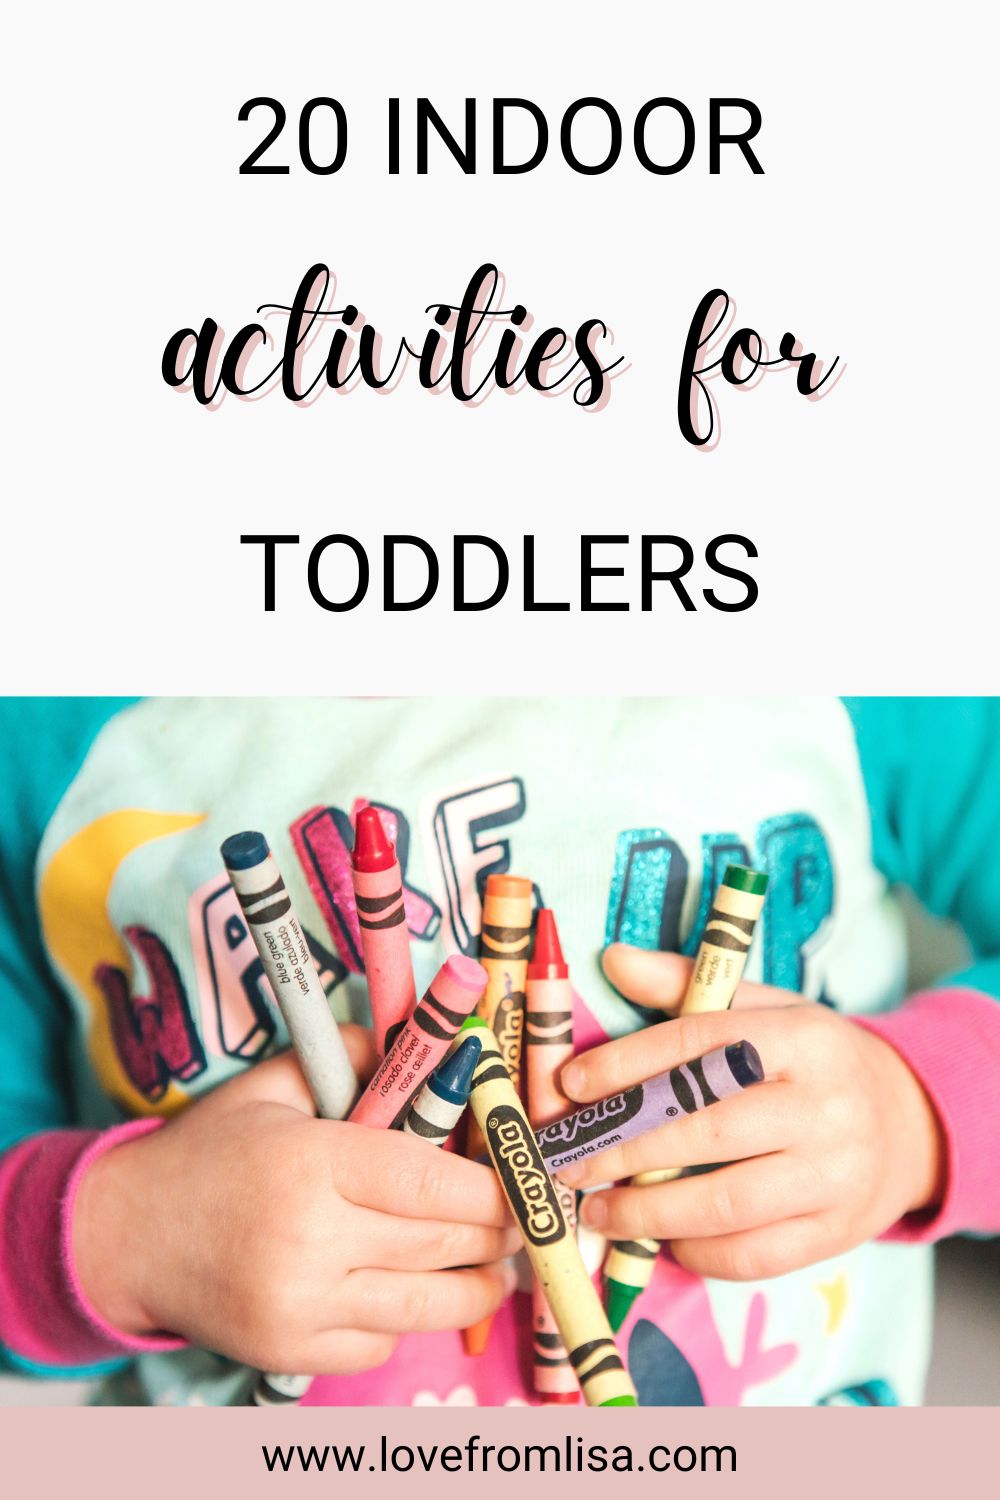 20 indoor activities for toddlers that will entertain your toddler at home, including toddler messy play, toddler arts and crafts, toddler games, and more.